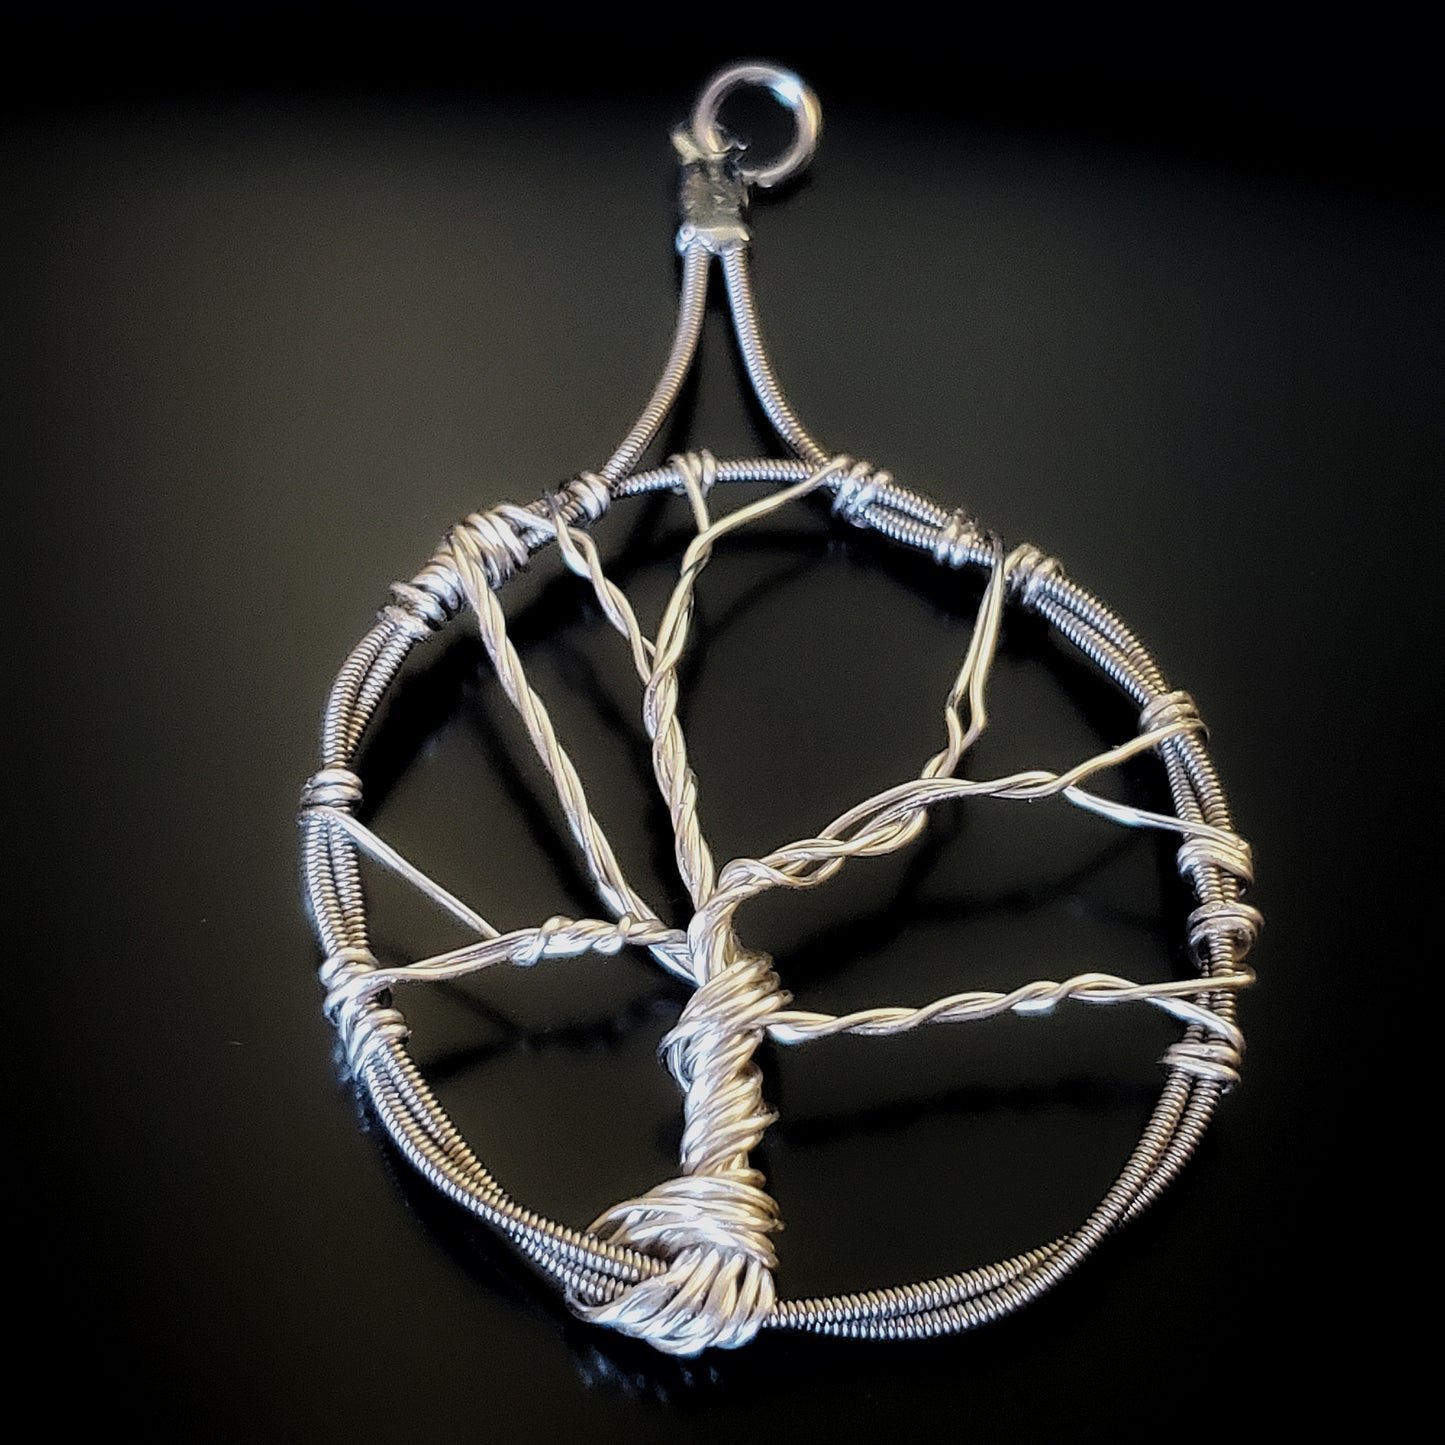 a pendant in the shape of a tree with a circle around it - the tree is made of silver coloured wire and the circle is made from upcycled guitar strings - black background